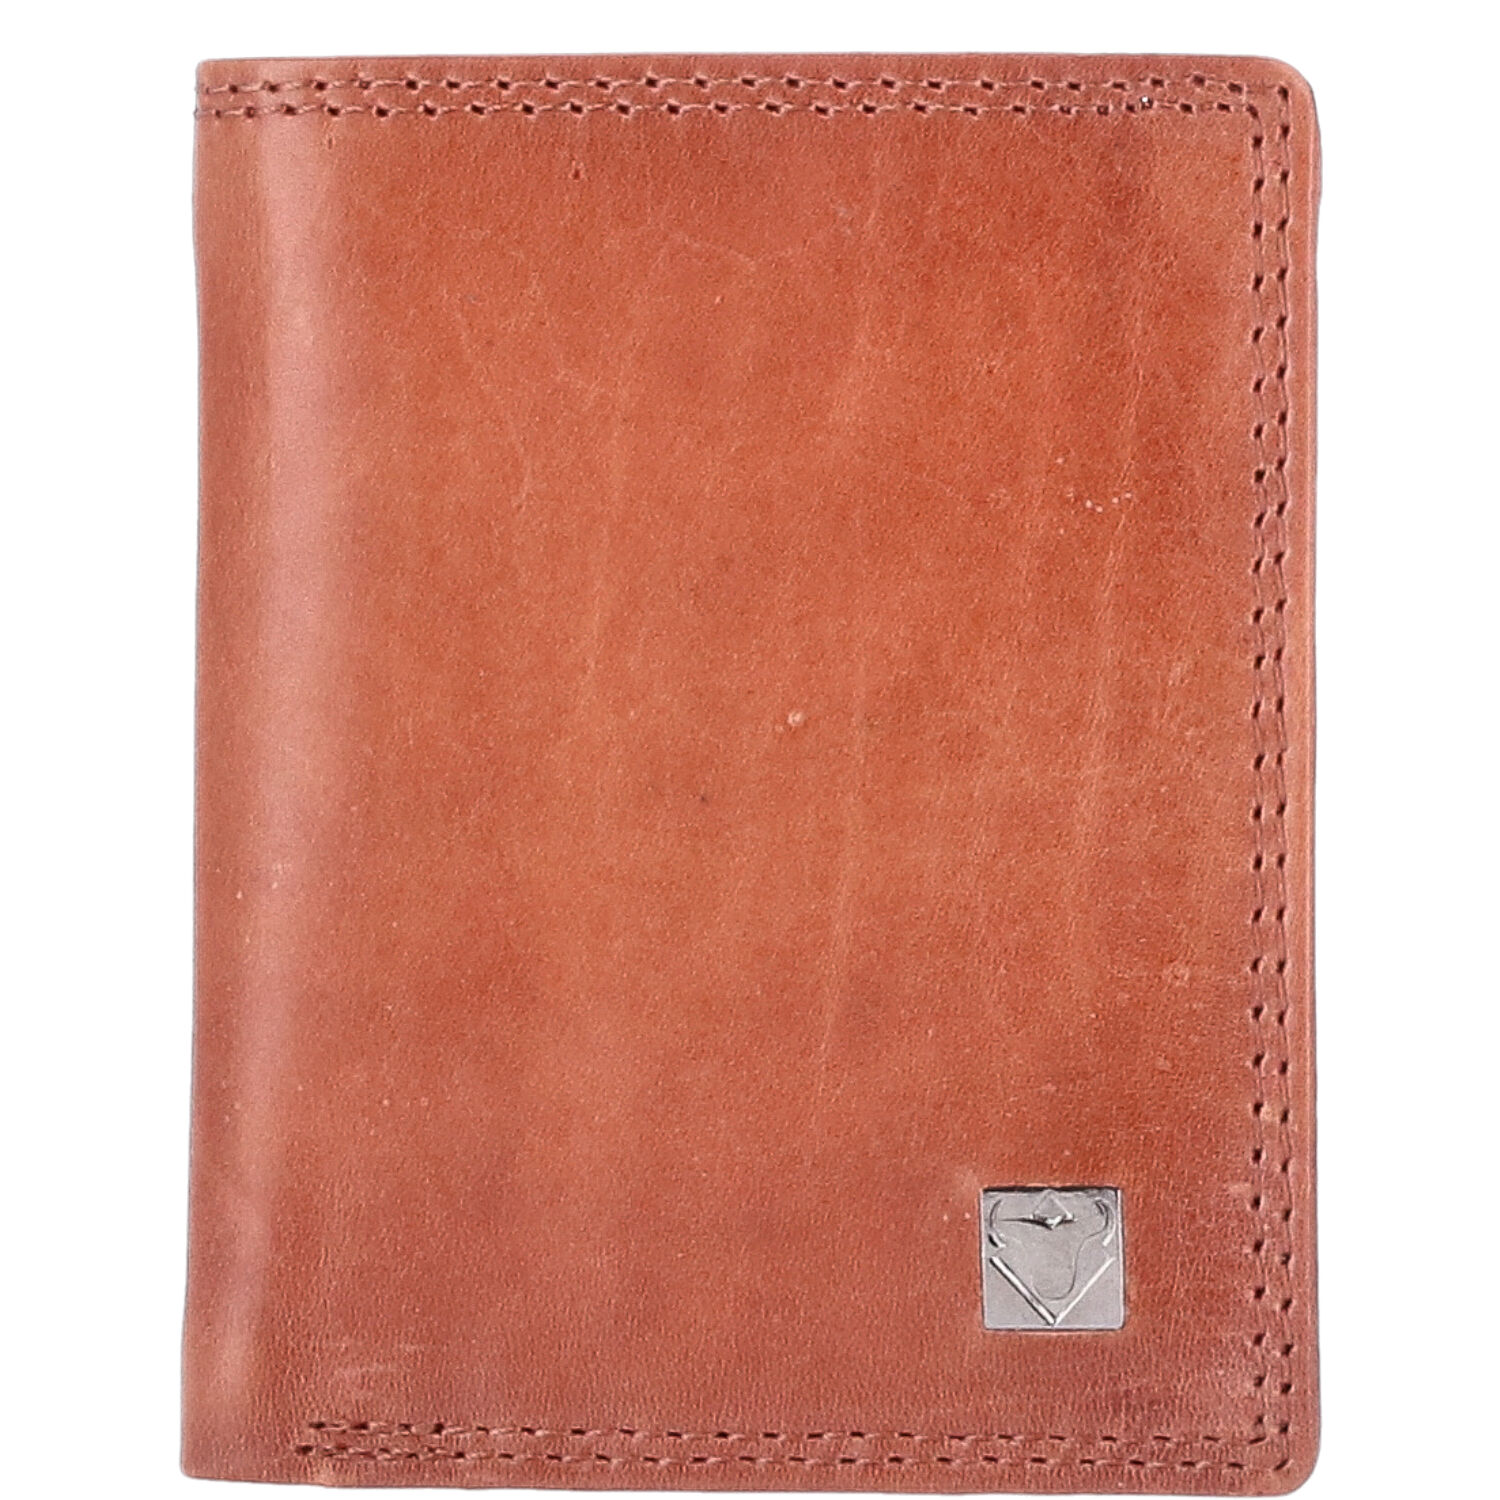 Urban Bull Wallet Washed Leather Cognac